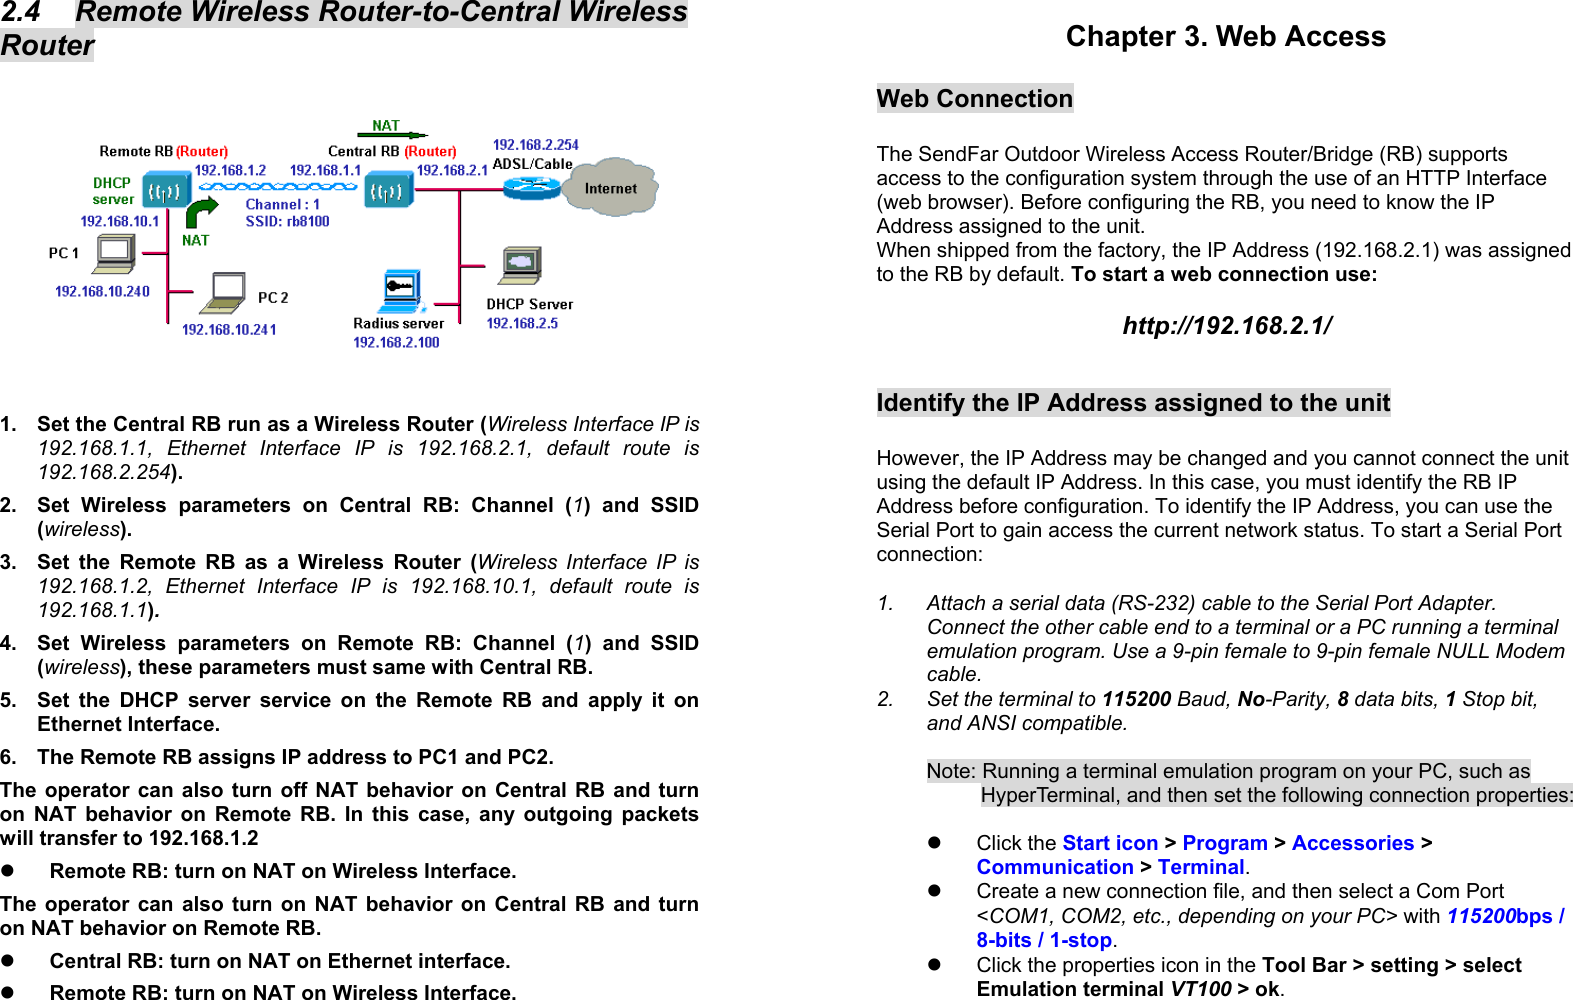 12 2.4  Remote Wireless Router-to-Central Wireless Router  1.  Set the Central RB run as a Wireless Router (Wireless Interface IP is 192.168.1.1, Ethernet Interface IP is 192.168.2.1, default route is 192.168.2.254). 2.  Set Wireless parameters on Central RB: Channel (1) and SSID (wireless). 3.  Set the Remote RB as a Wireless Router (Wireless Interface IP is 192.168.1.2, Ethernet Interface IP is 192.168.10.1, default route is 192.168.1.1).  4.  Set Wireless parameters on Remote RB: Channel (1) and SSID (wireless), these parameters must same with Central RB. 5.  Set the DHCP server service on the Remote RB and apply it on Ethernet Interface. 6.  The Remote RB assigns IP address to PC1 and PC2. The operator can also turn off NAT behavior on Central RB and turn on NAT behavior on Remote RB. In this case, any outgoing packets will transfer to 192.168.1.2   Remote RB: turn on NAT on Wireless Interface. The operator can also turn on NAT behavior on Central RB and turn on NAT behavior on Remote RB.   Central RB: turn on NAT on Ethernet interface.   Remote RB: turn on NAT on Wireless Interface.  13 Chapter 3. Web Access  Web Connection  The SendFar Outdoor Wireless Access Router/Bridge (RB) supports access to the configuration system through the use of an HTTP Interface (web browser). Before configuring the RB, you need to know the IP Address assigned to the unit.  When shipped from the factory, the IP Address (192.168.2.1) was assigned to the RB by default. To start a web connection use:   http://192.168.2.1/   Identify the IP Address assigned to the unit   However, the IP Address may be changed and you cannot connect the unit using the default IP Address. In this case, you must identify the RB IP Address before configuration. To identify the IP Address, you can use the Serial Port to gain access the current network status. To start a Serial Port connection:  1.  Attach a serial data (RS-232) cable to the Serial Port Adapter. Connect the other cable end to a terminal or a PC running a terminal emulation program. Use a 9-pin female to 9-pin female NULL Modem cable. 2.  Set the terminal to 115200 Baud, No-Parity, 8 data bits, 1 Stop bit, and ANSI compatible.  Note: Running a terminal emulation program on your PC, such as HyperTerminal, and then set the following connection properties:    Click the Start icon &gt; Program &gt; Accessories &gt; Communication &gt; Terminal.    Create a new connection file, and then select a Com Port &lt;COM1, COM2, etc., depending on your PC&gt; with 115200bps / 8-bits / 1-stop.    Click the properties icon in the Tool Bar &gt; setting &gt; select Emulation terminal VT100 &gt; ok.  